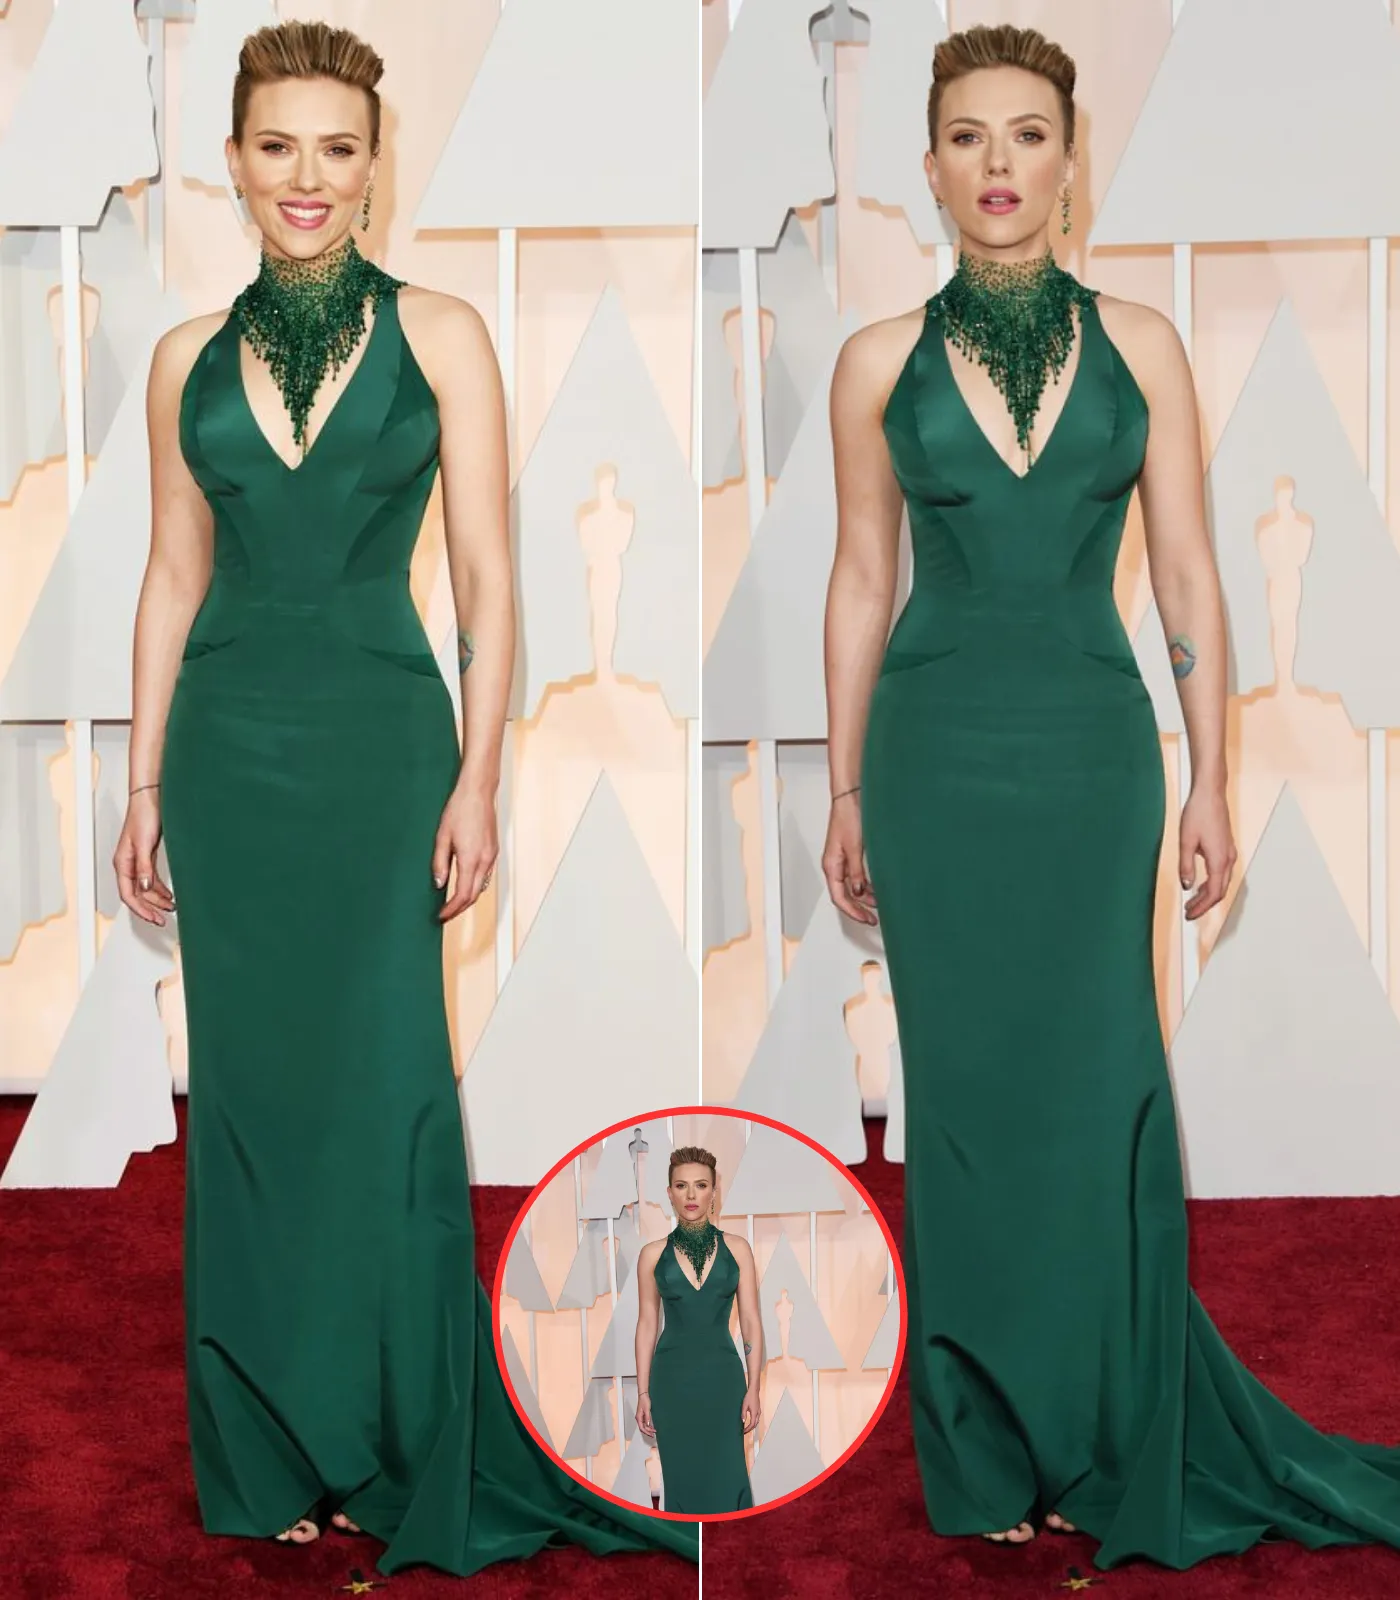 When Scarlett Johansson Proved She Has The ‘Best Hourglass Figure’ In Hollywood